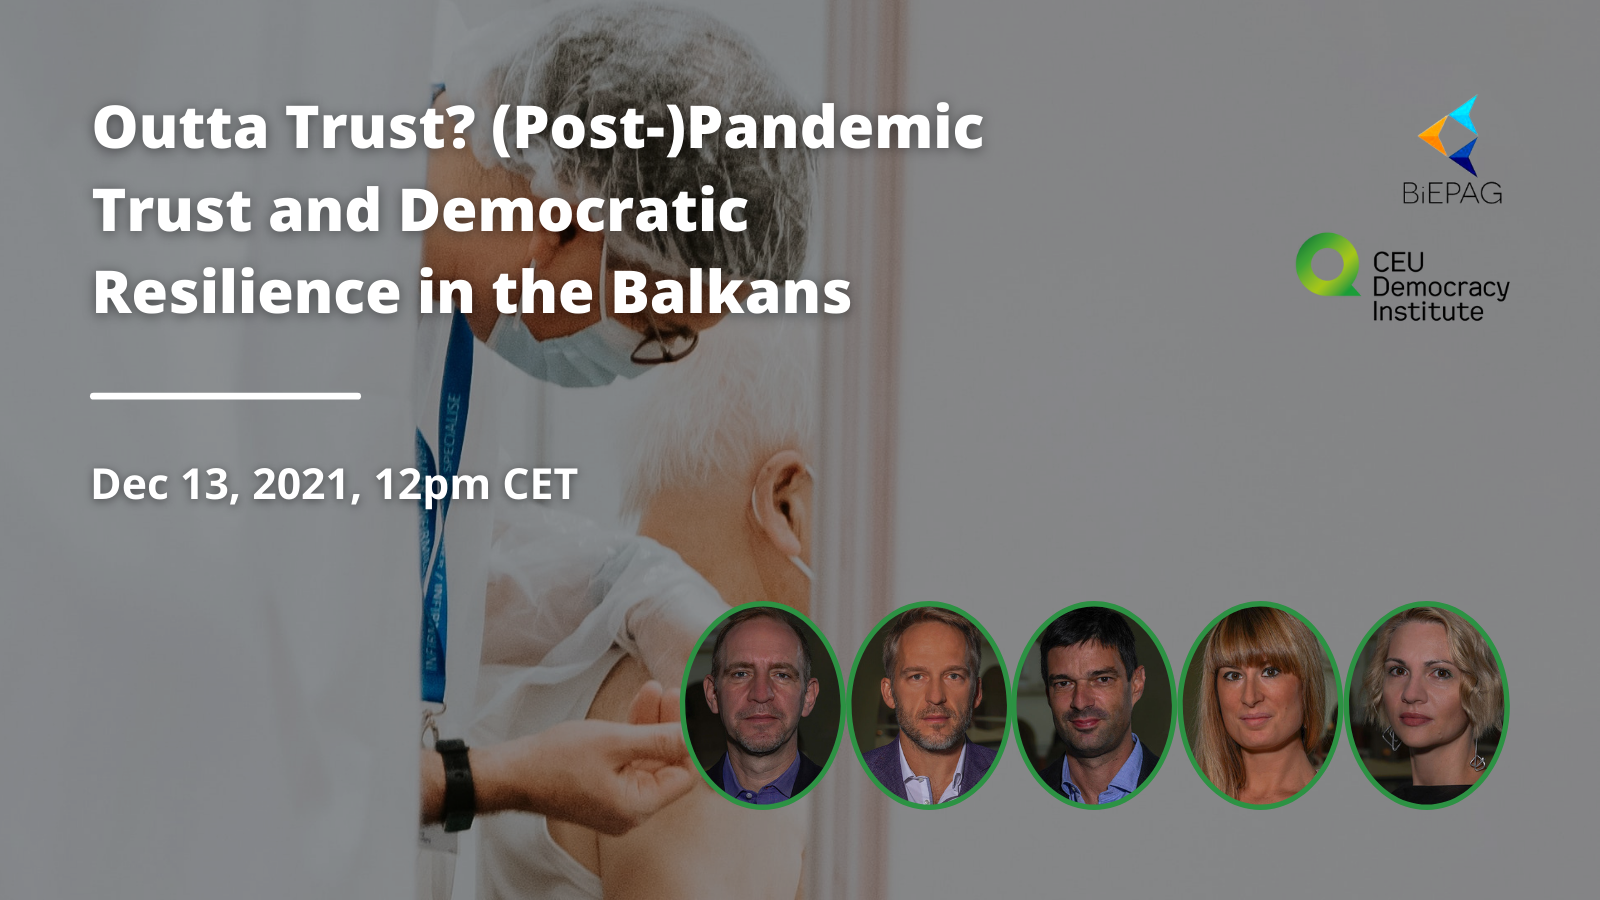 BiEPAG Event: “Outta trust? (Post-) pandemic trust and democratic resilience in the Balkans”